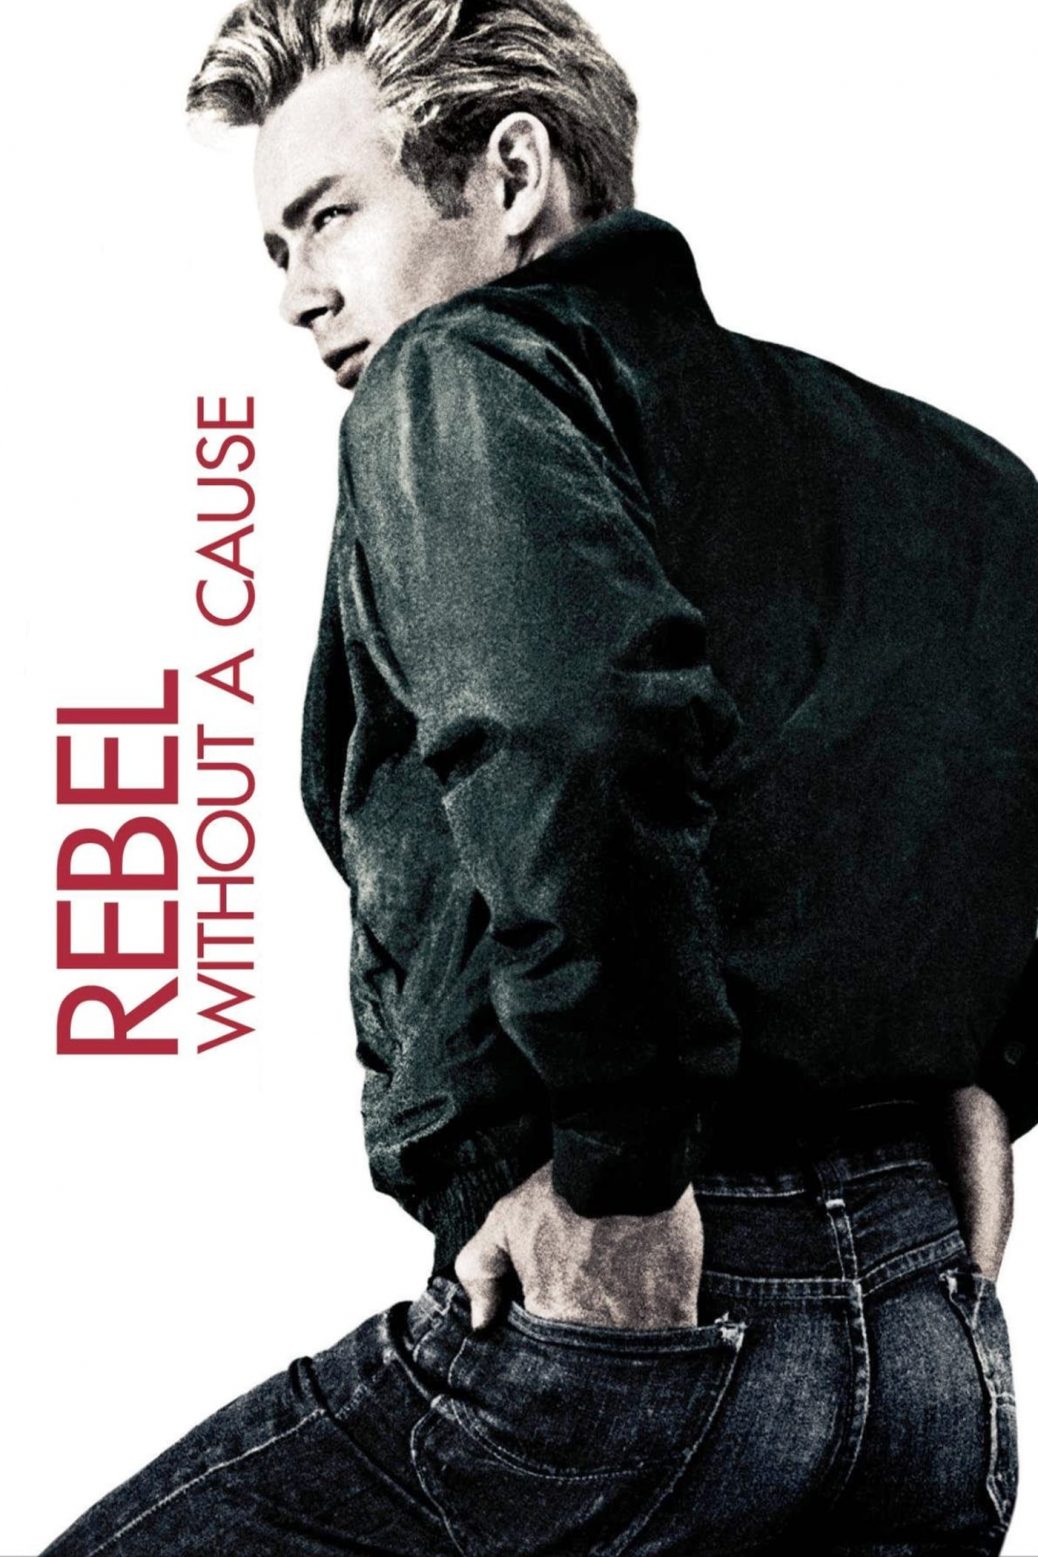 Poster for the movie "Rebel Without a Cause"